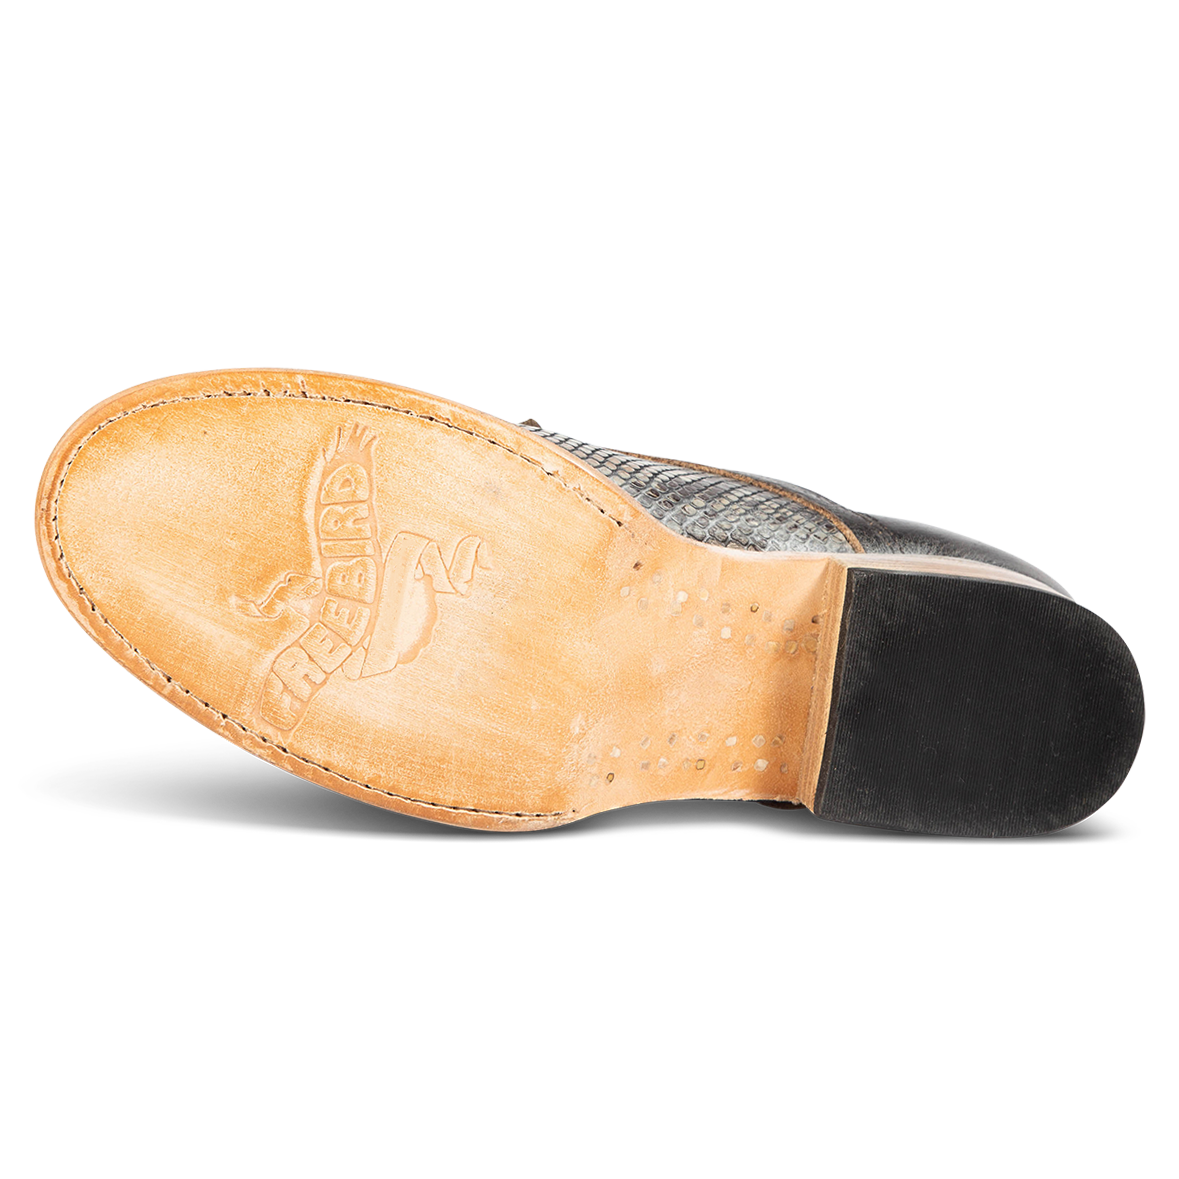 Leather sole imprinted with FREEBIRD on Mabel black multi womens oxford shoe